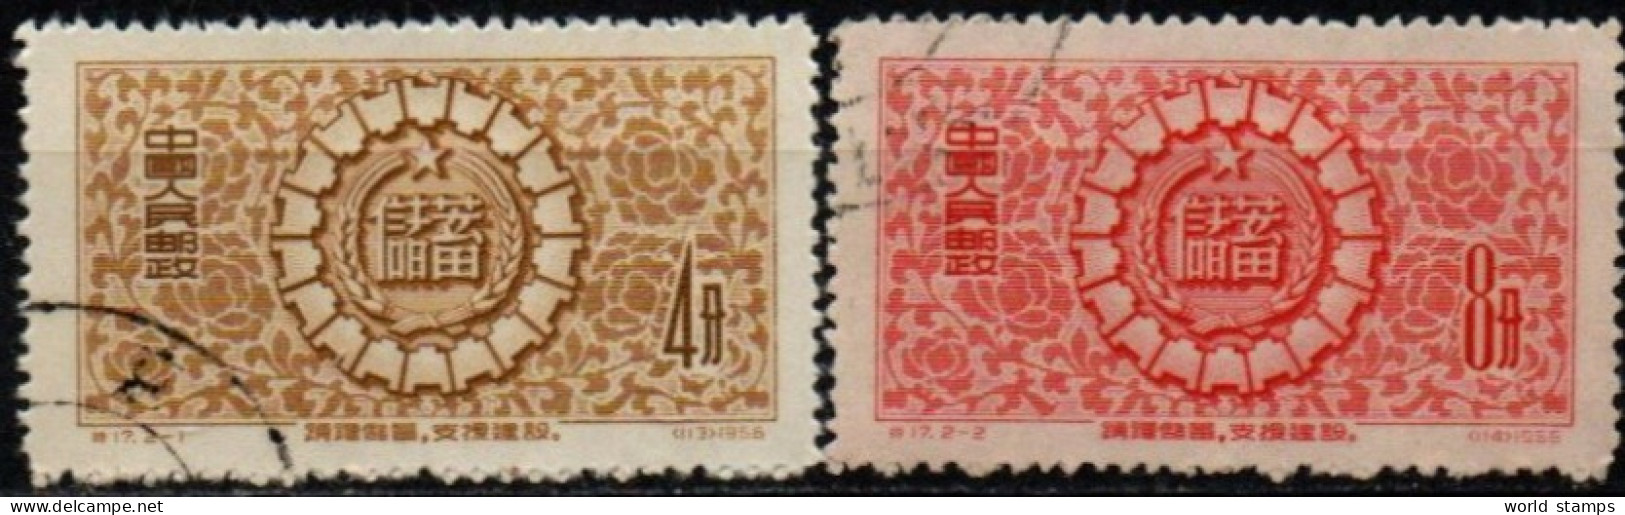 CHINE 1956 O - Used Stamps